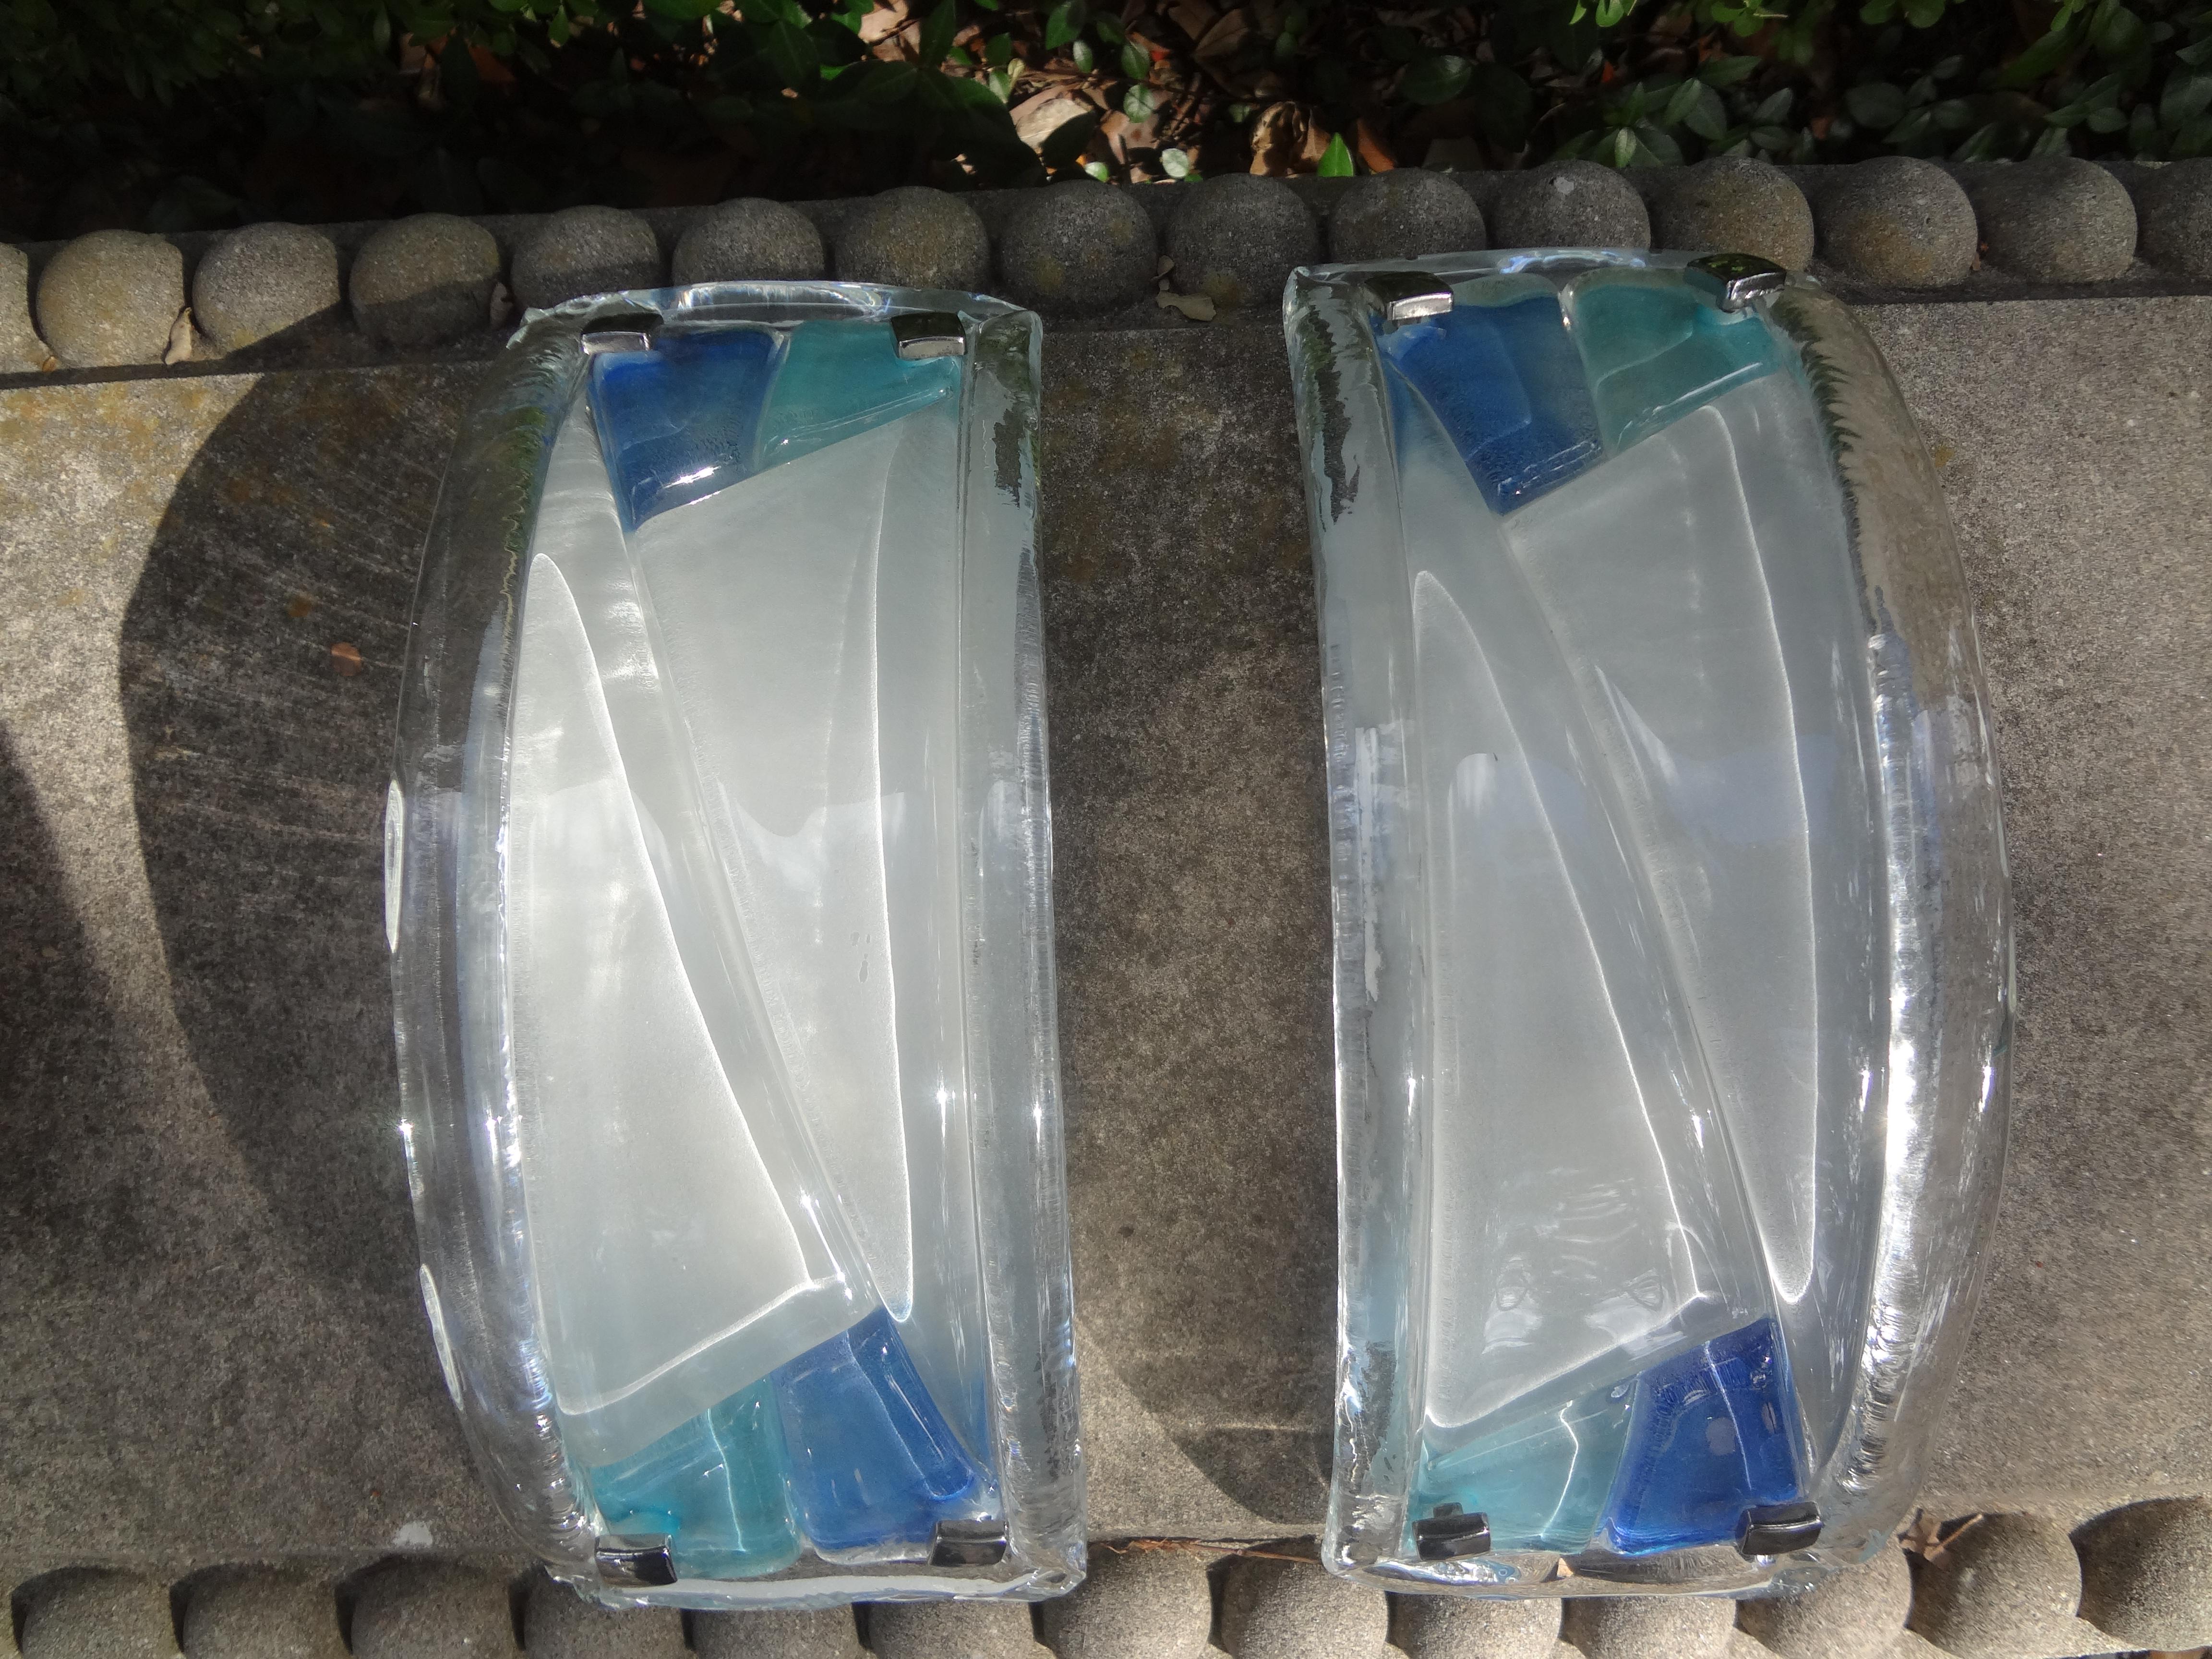 Pair of Mid-Century Modern Cubist Murano sconces.
Stunning pair of Mid-Century Modern cubist style Murano sconces. These gorgeous sconces are comprised of thick opaque Murano glass with blue and turquoise geometric designs made by Murano 5. These